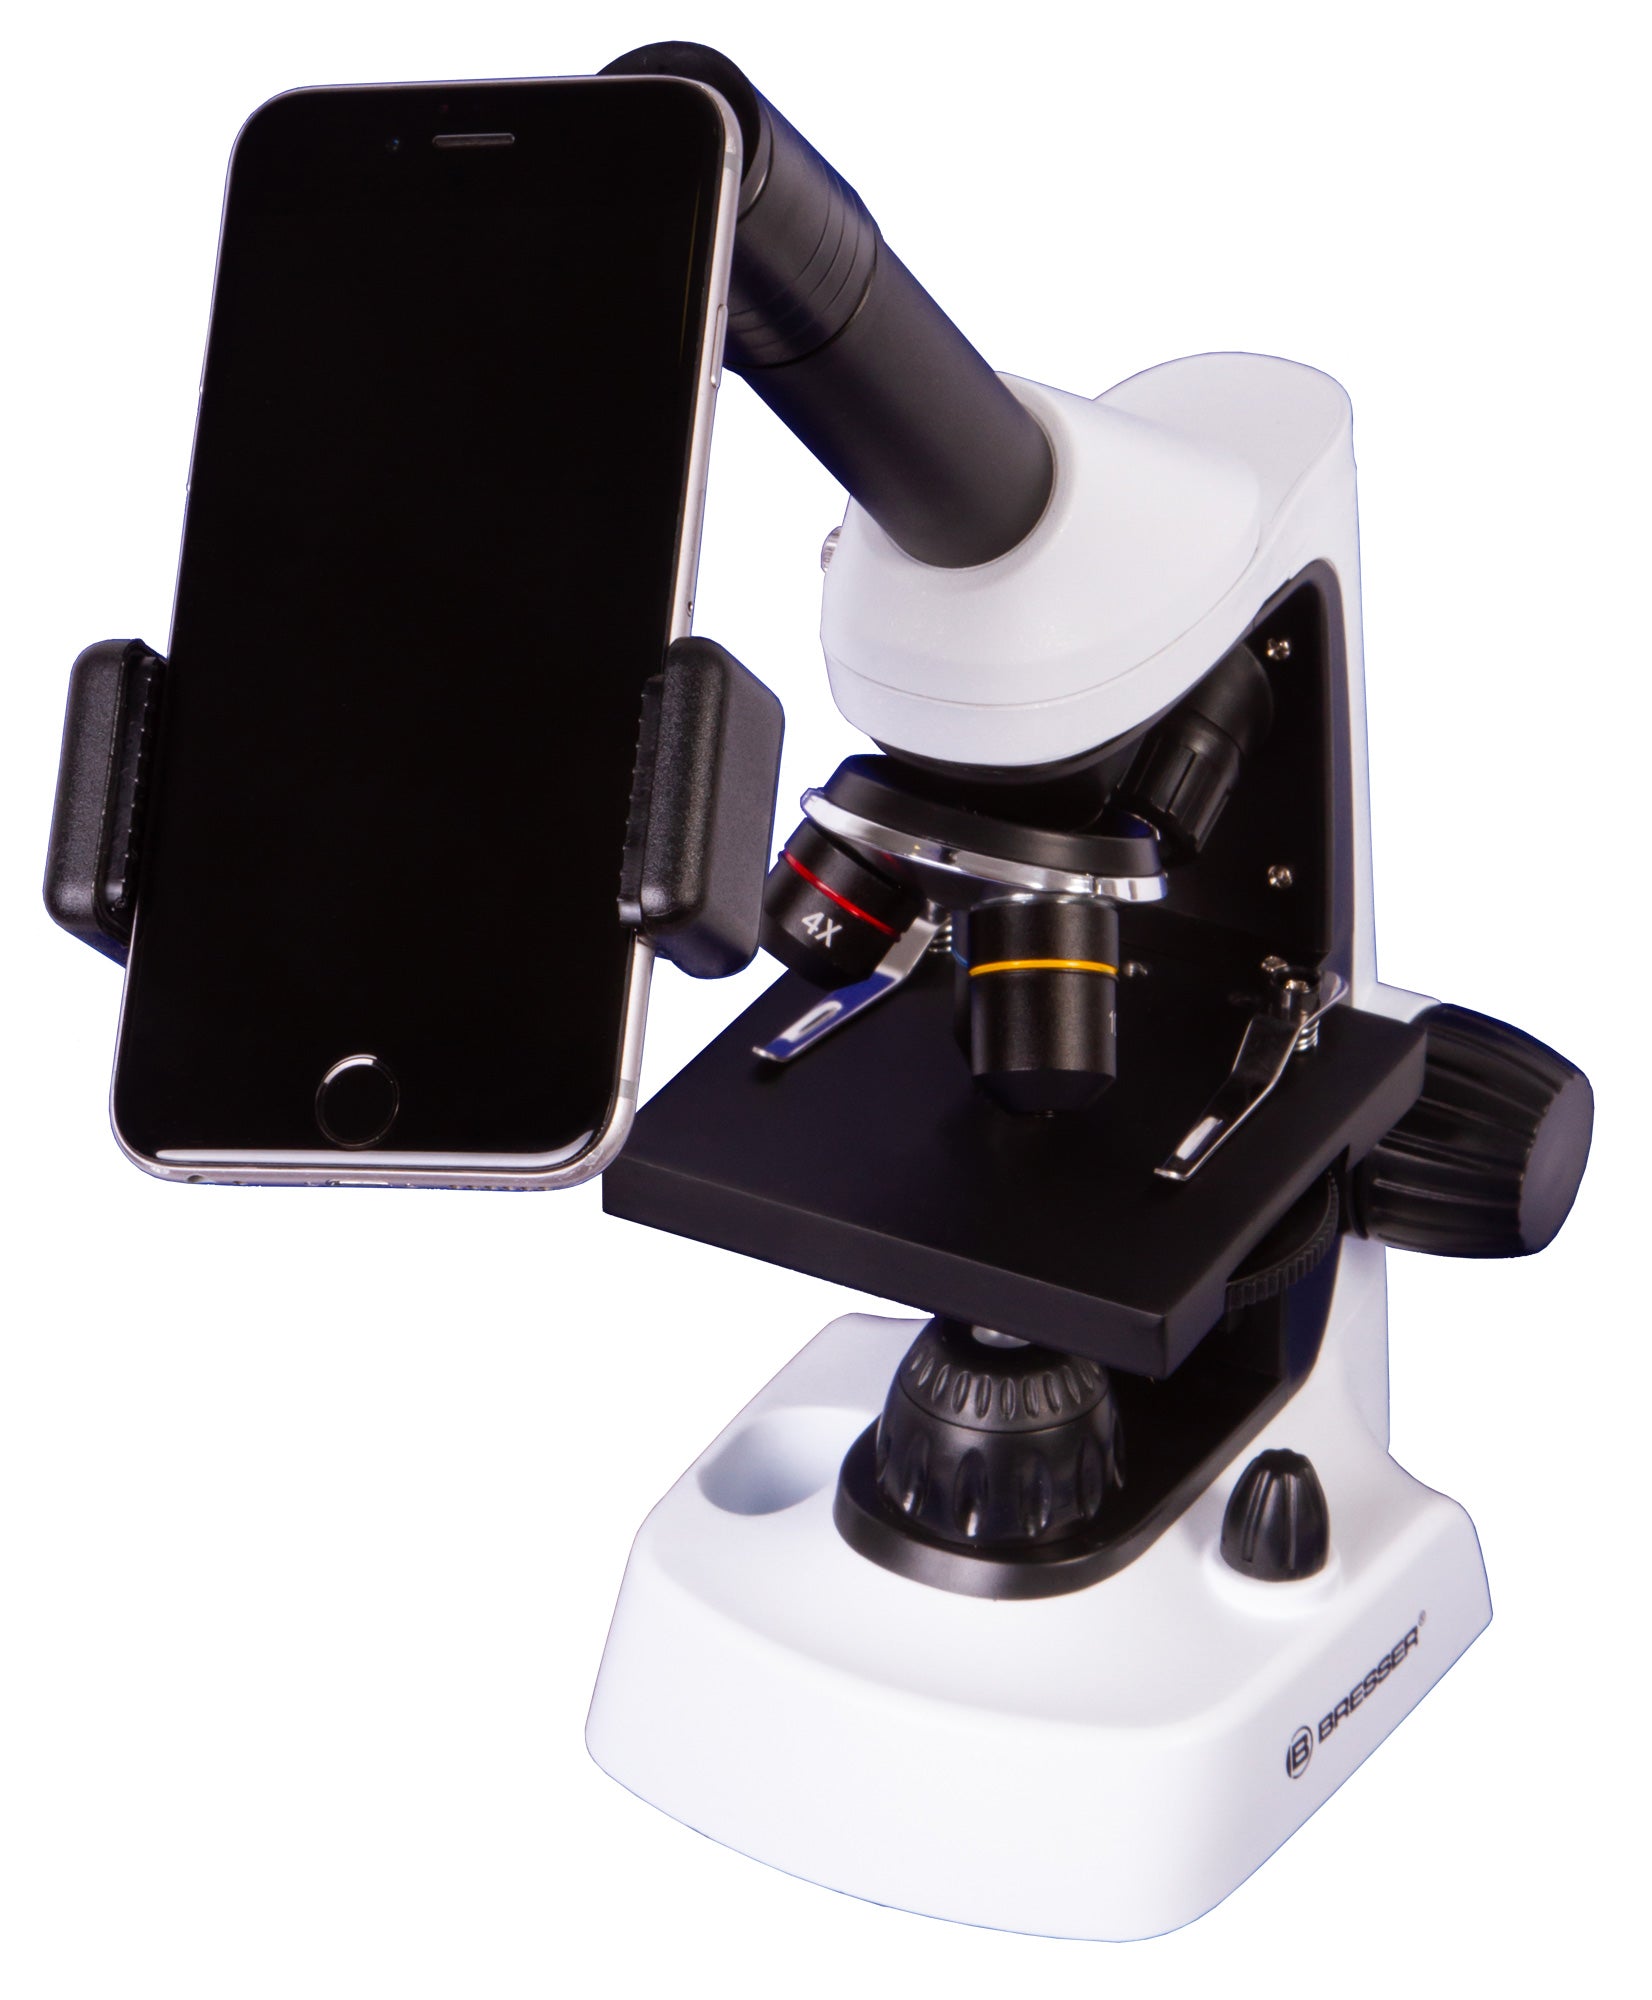 Bresser Junior Microscope with Magnification 40x-2000x